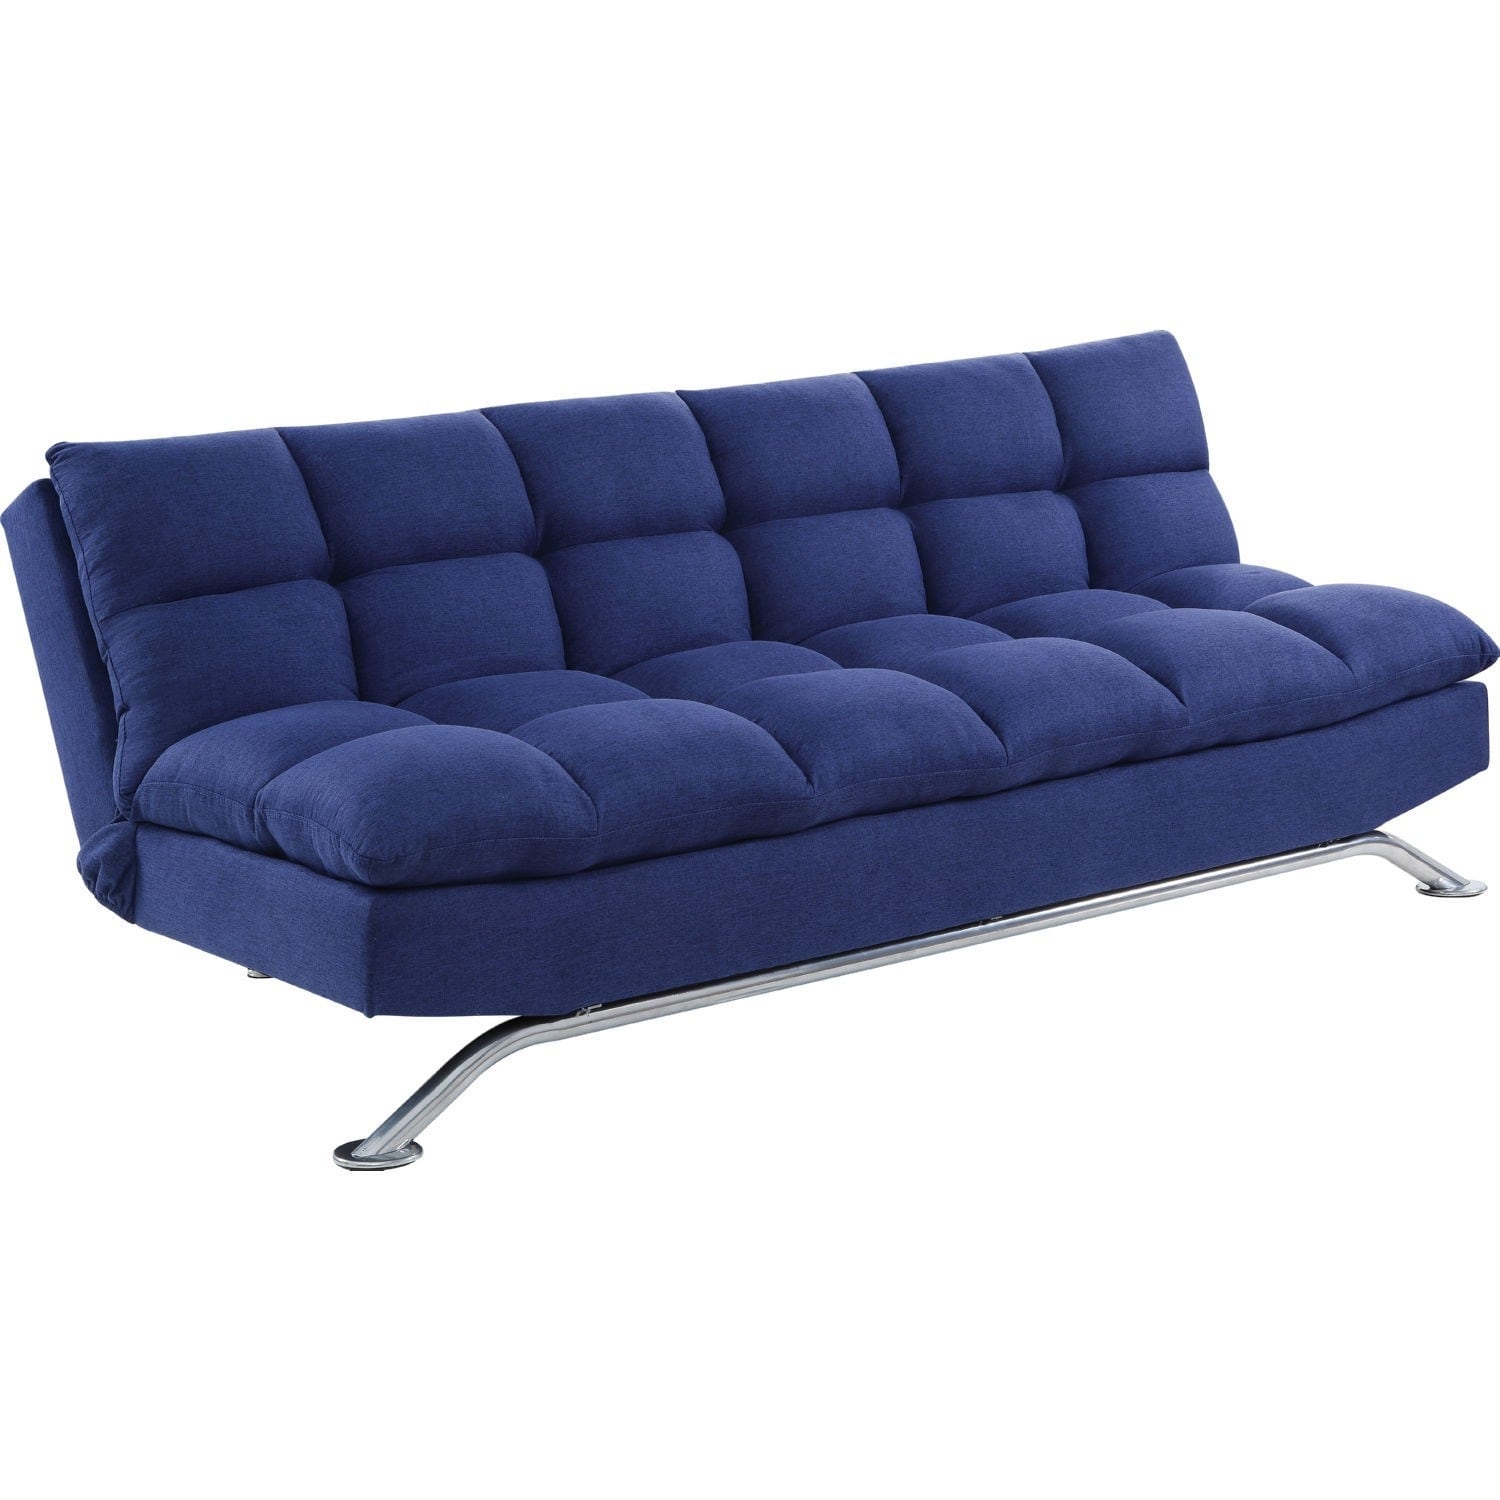 Adjustable Sofa With Tufted Seat And Metal Frame  Blue